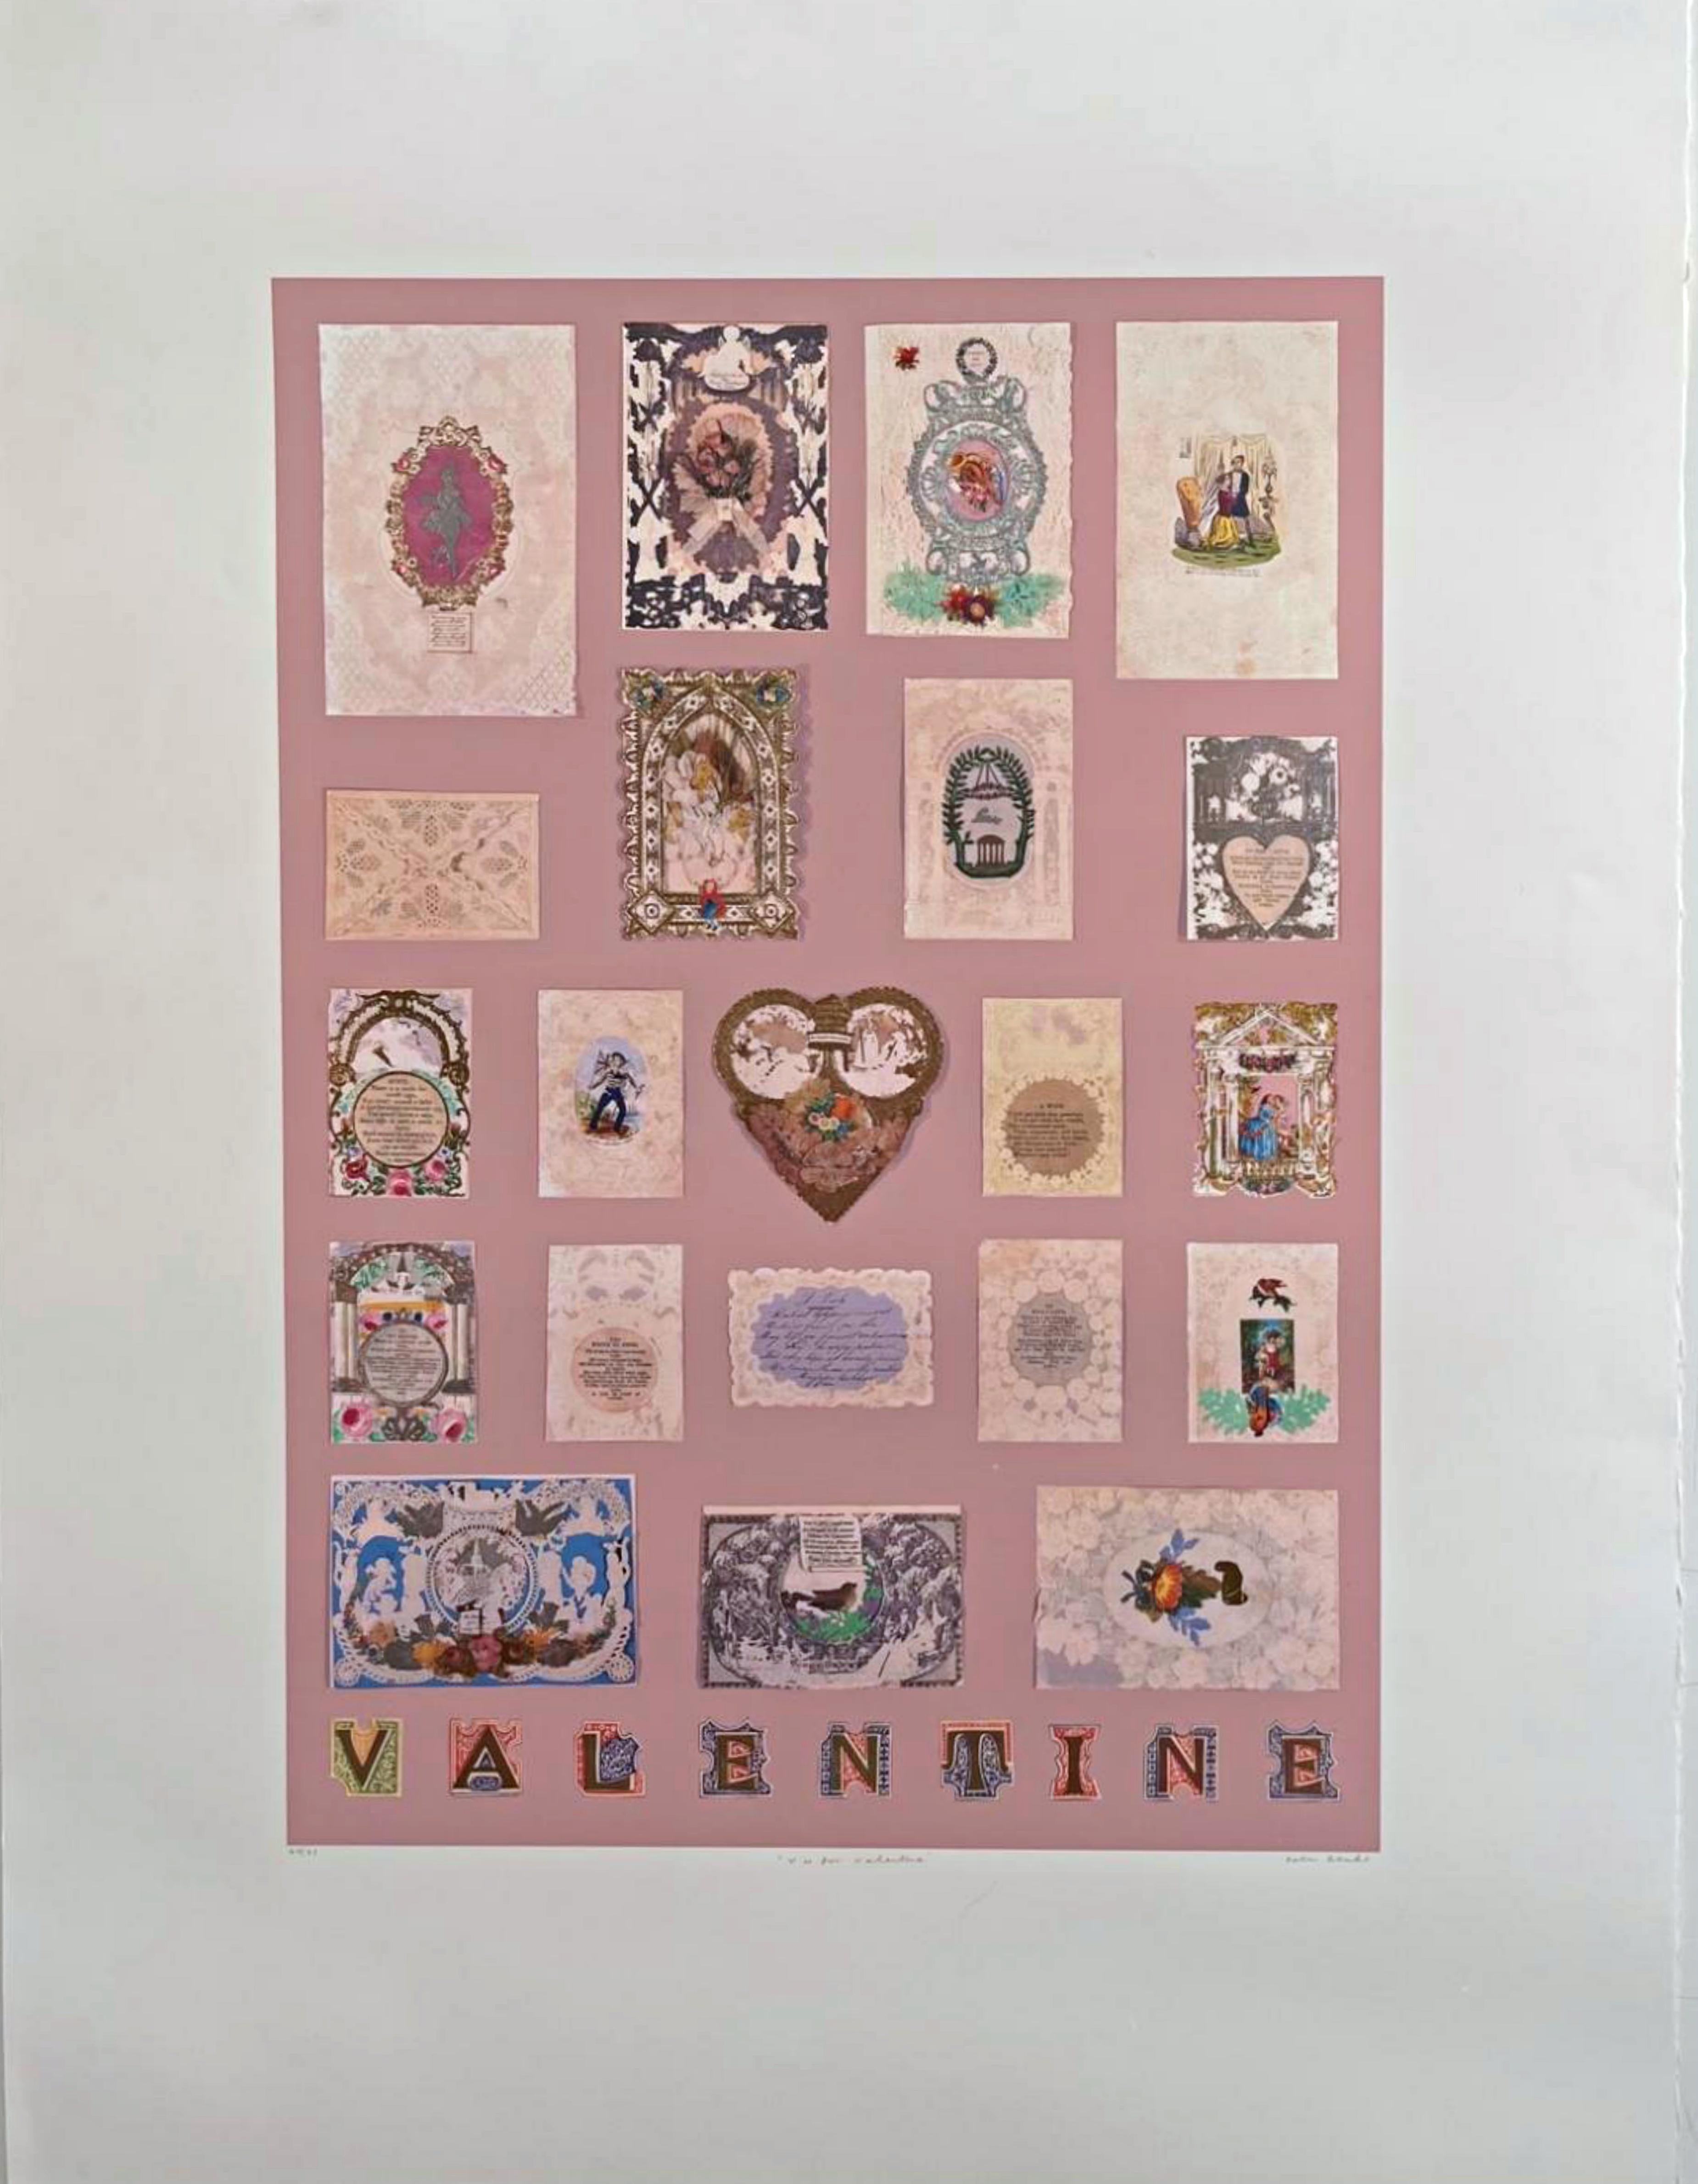 V is for Valentine  - Print by Peter Blake